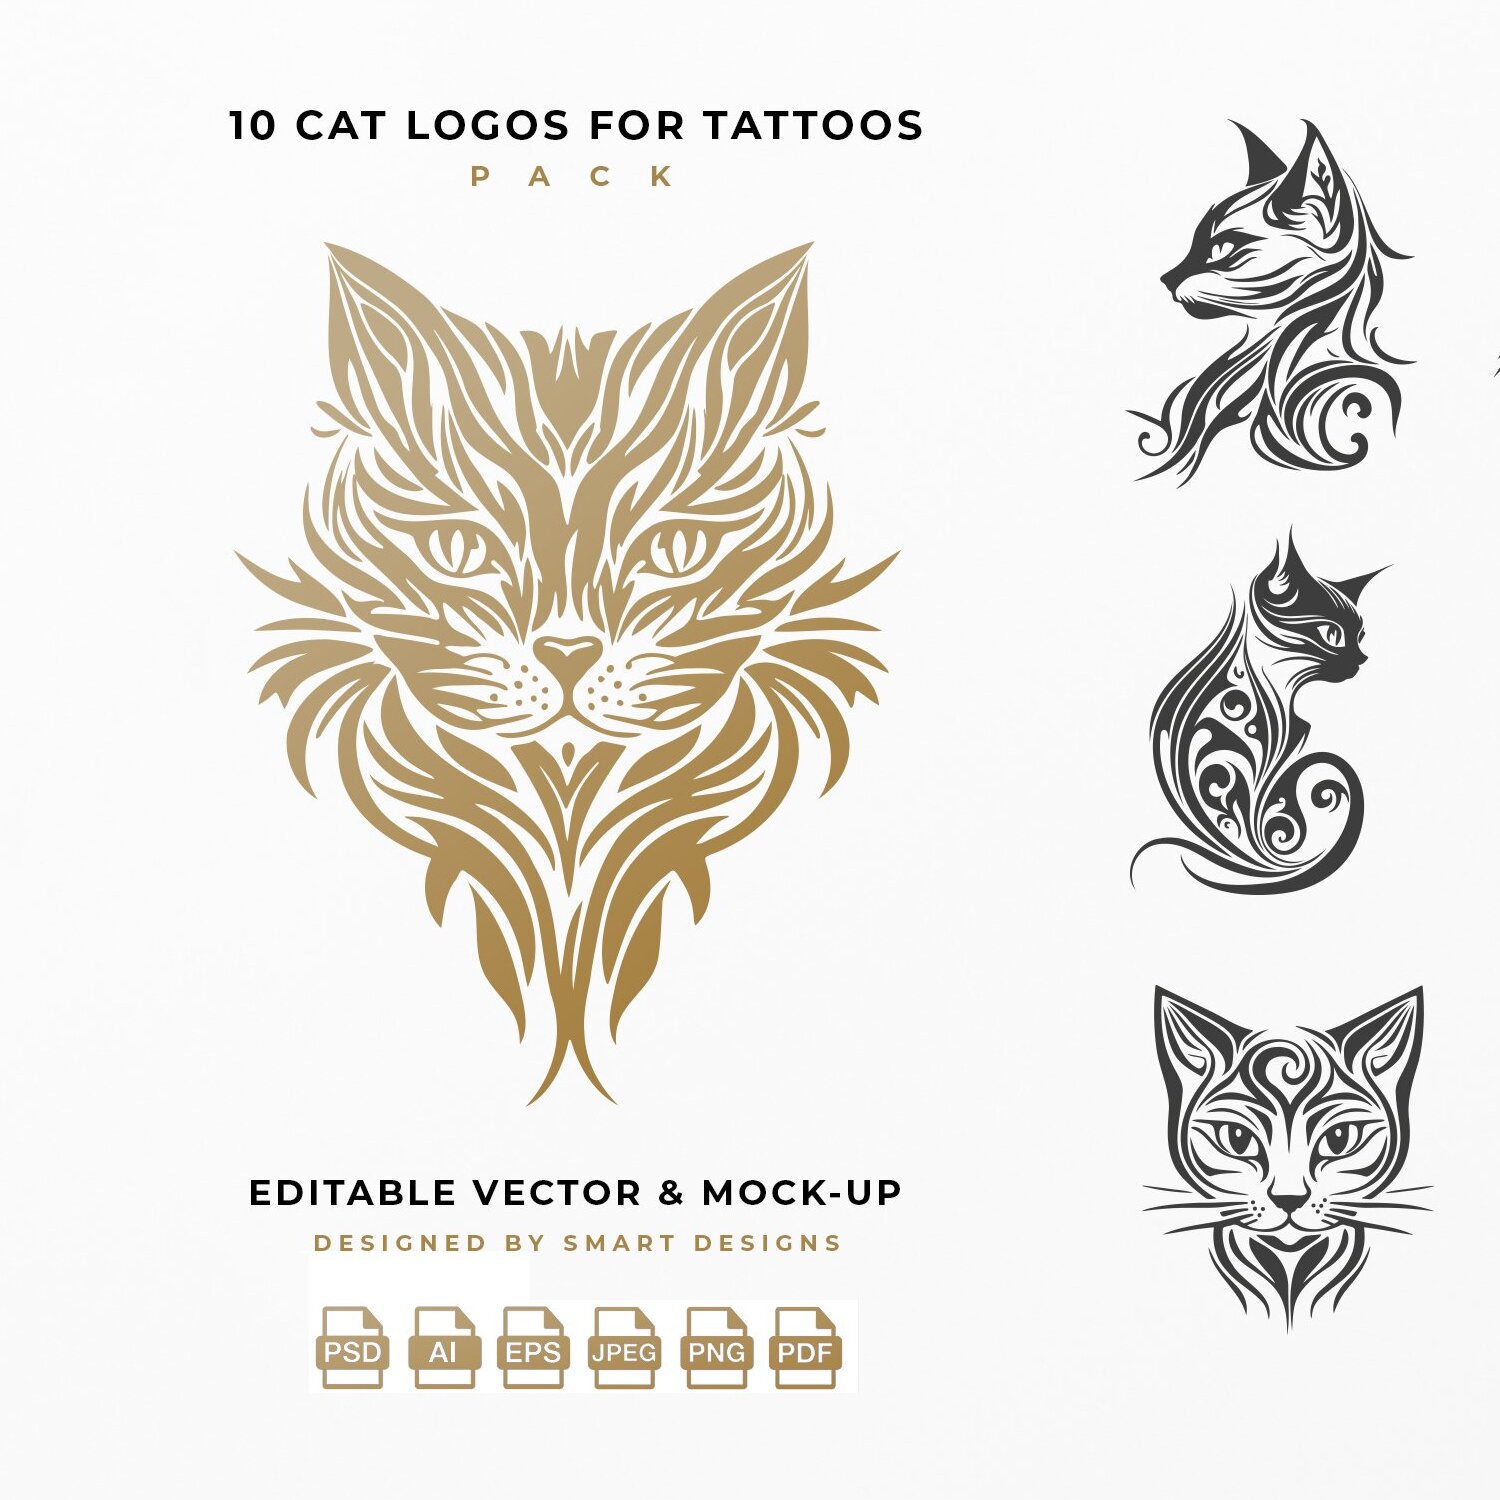 cat logos for tattoos pack x10 1 377